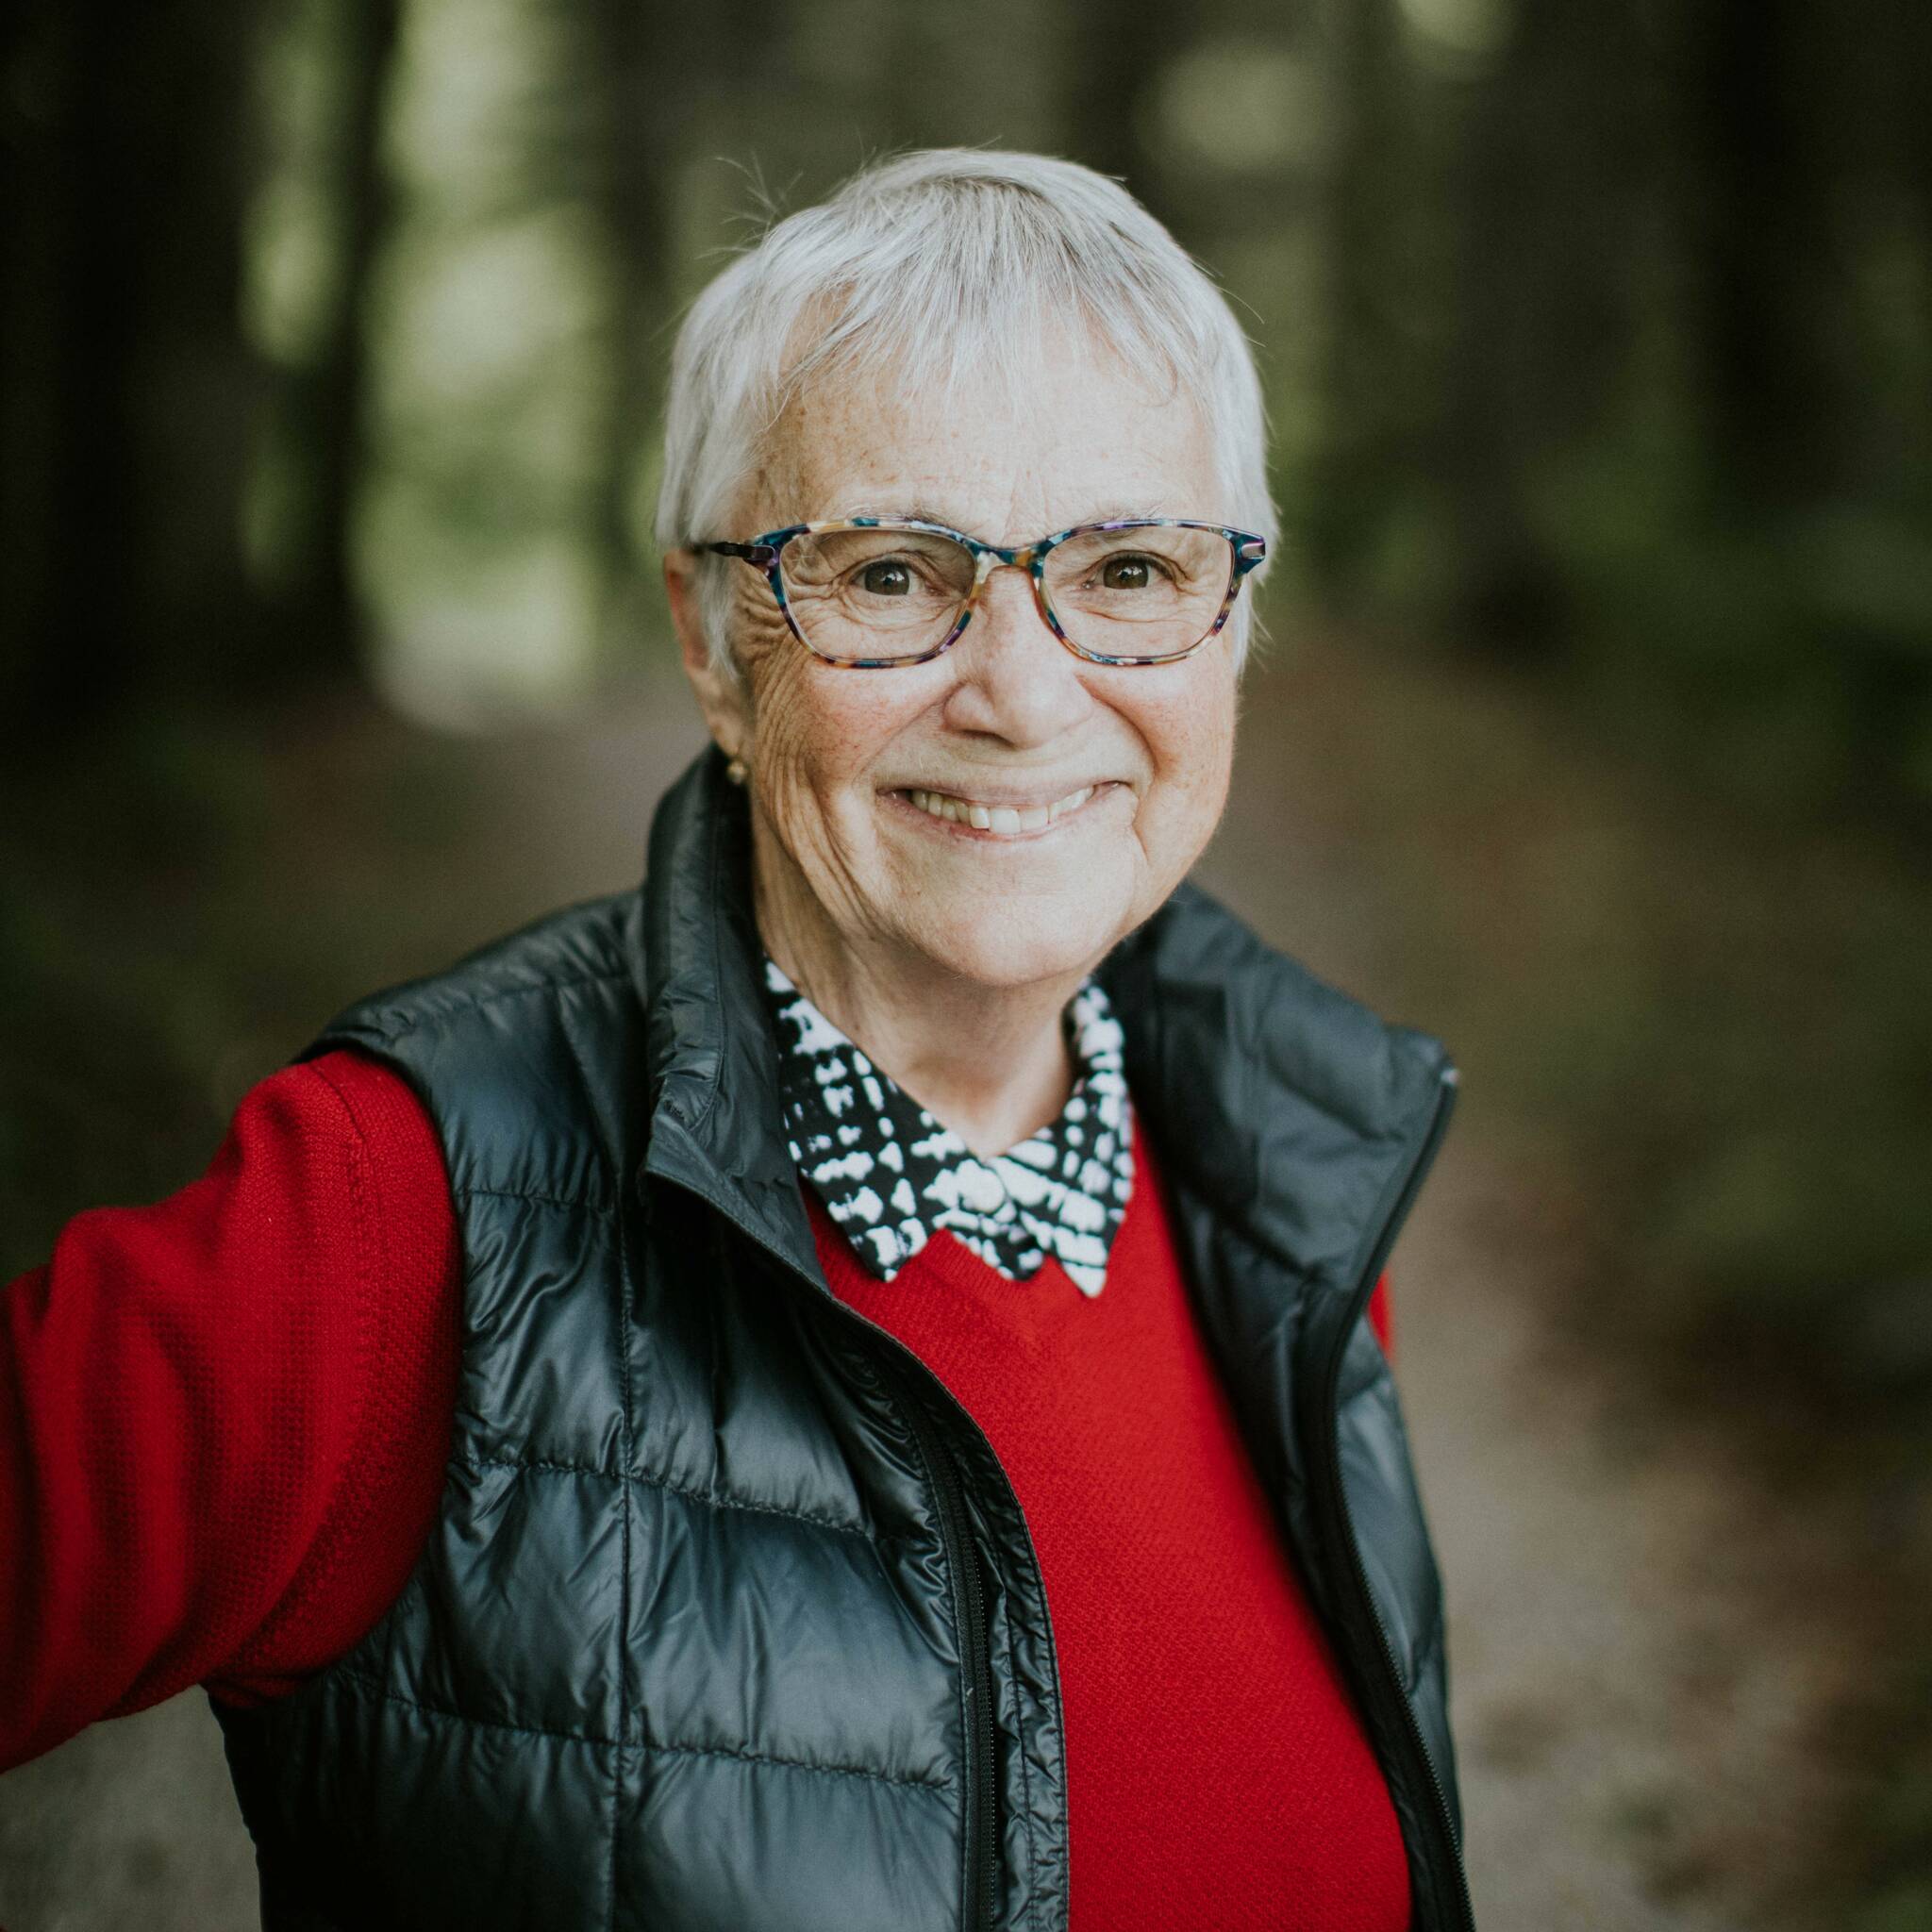 Photo by Joshua Veldstra/courtesy 
Angie Newby is photographed in summer 2022. Newby is the 2023 Haven House Women of Distinction “Woman of Wisdom” award recipient.